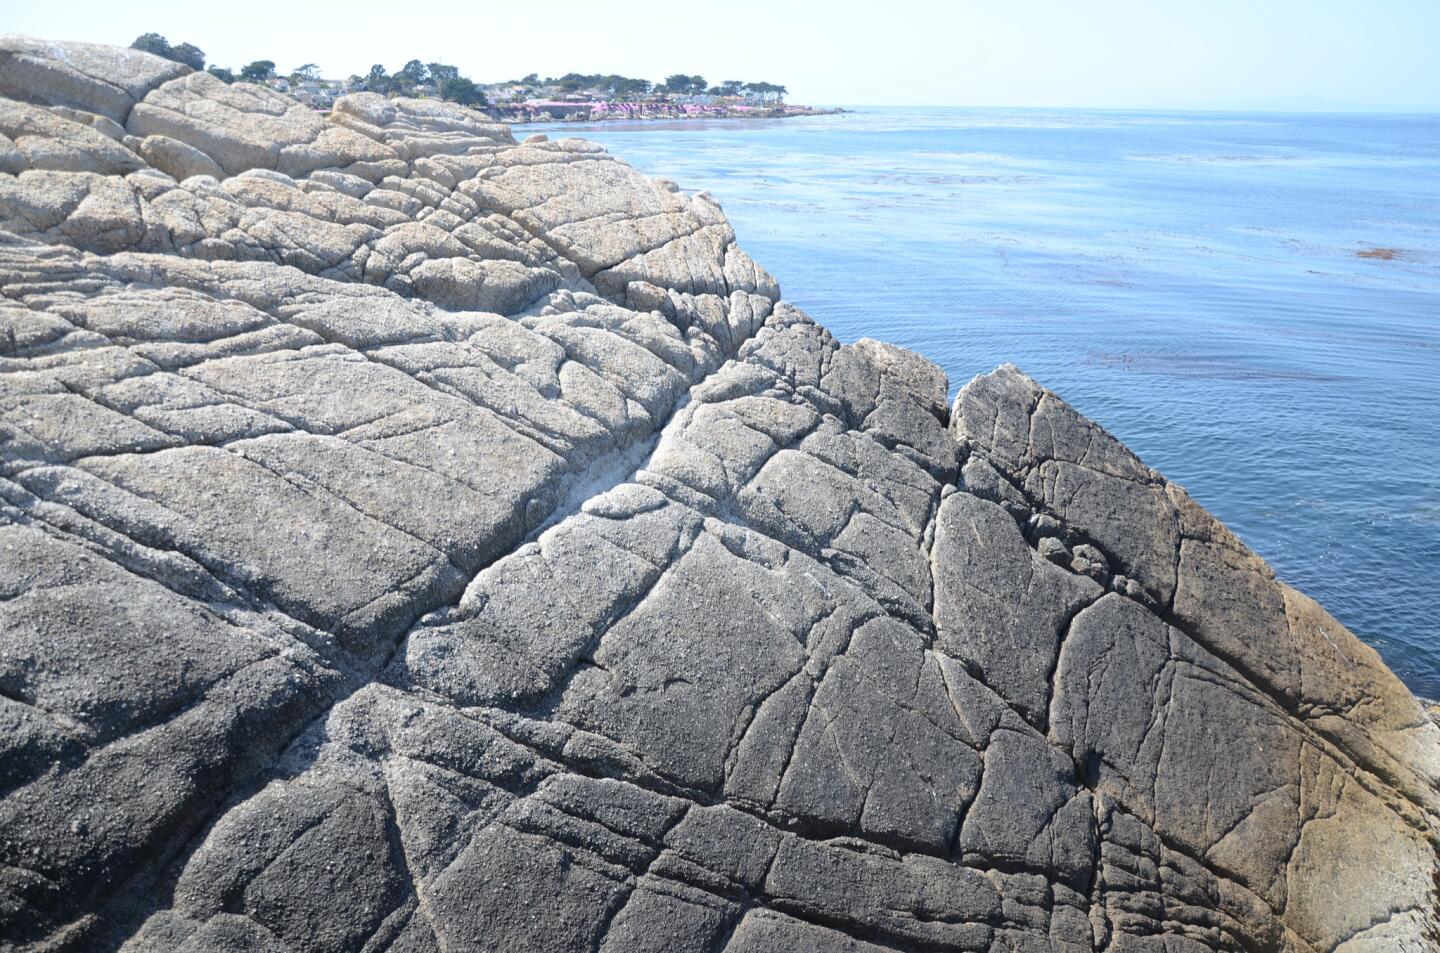 Pacific Grove: Rocks worth a stop